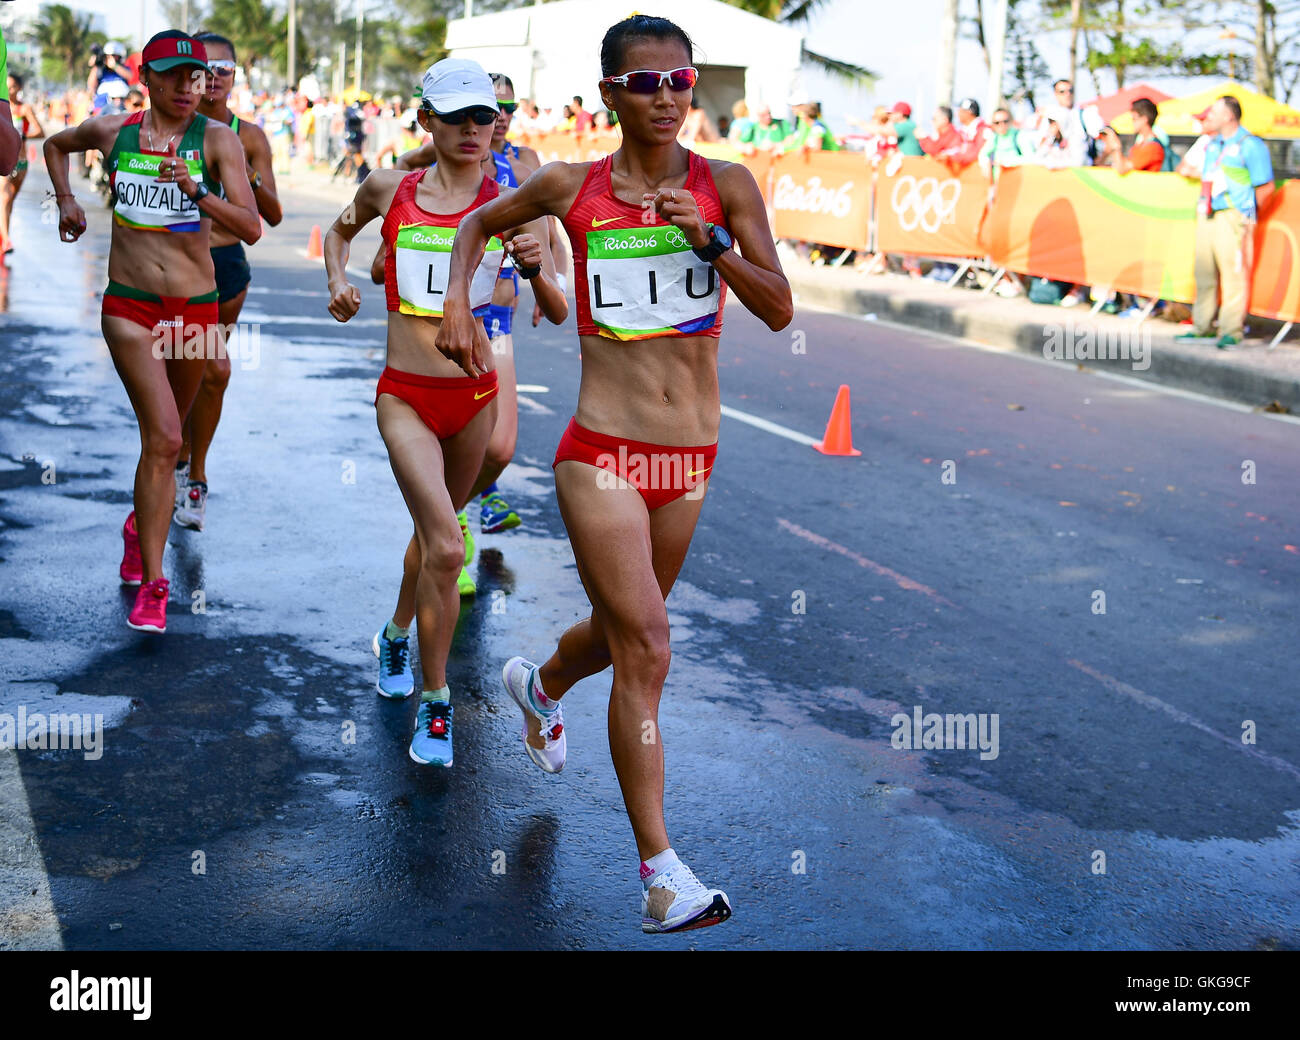 Rio de Janeiro, Brazil. 19th August, 2016. Hong Liu of China during the women's 20km race walk on Day 14 of the 2016 Rio Olympics at Pontal on August 19, 2016 in Rio de Janeiro, Brazil. (Photo by Roger Sedres/Gallo Images) Credit:  Roger Sedres/Alamy Live News Stock Photo